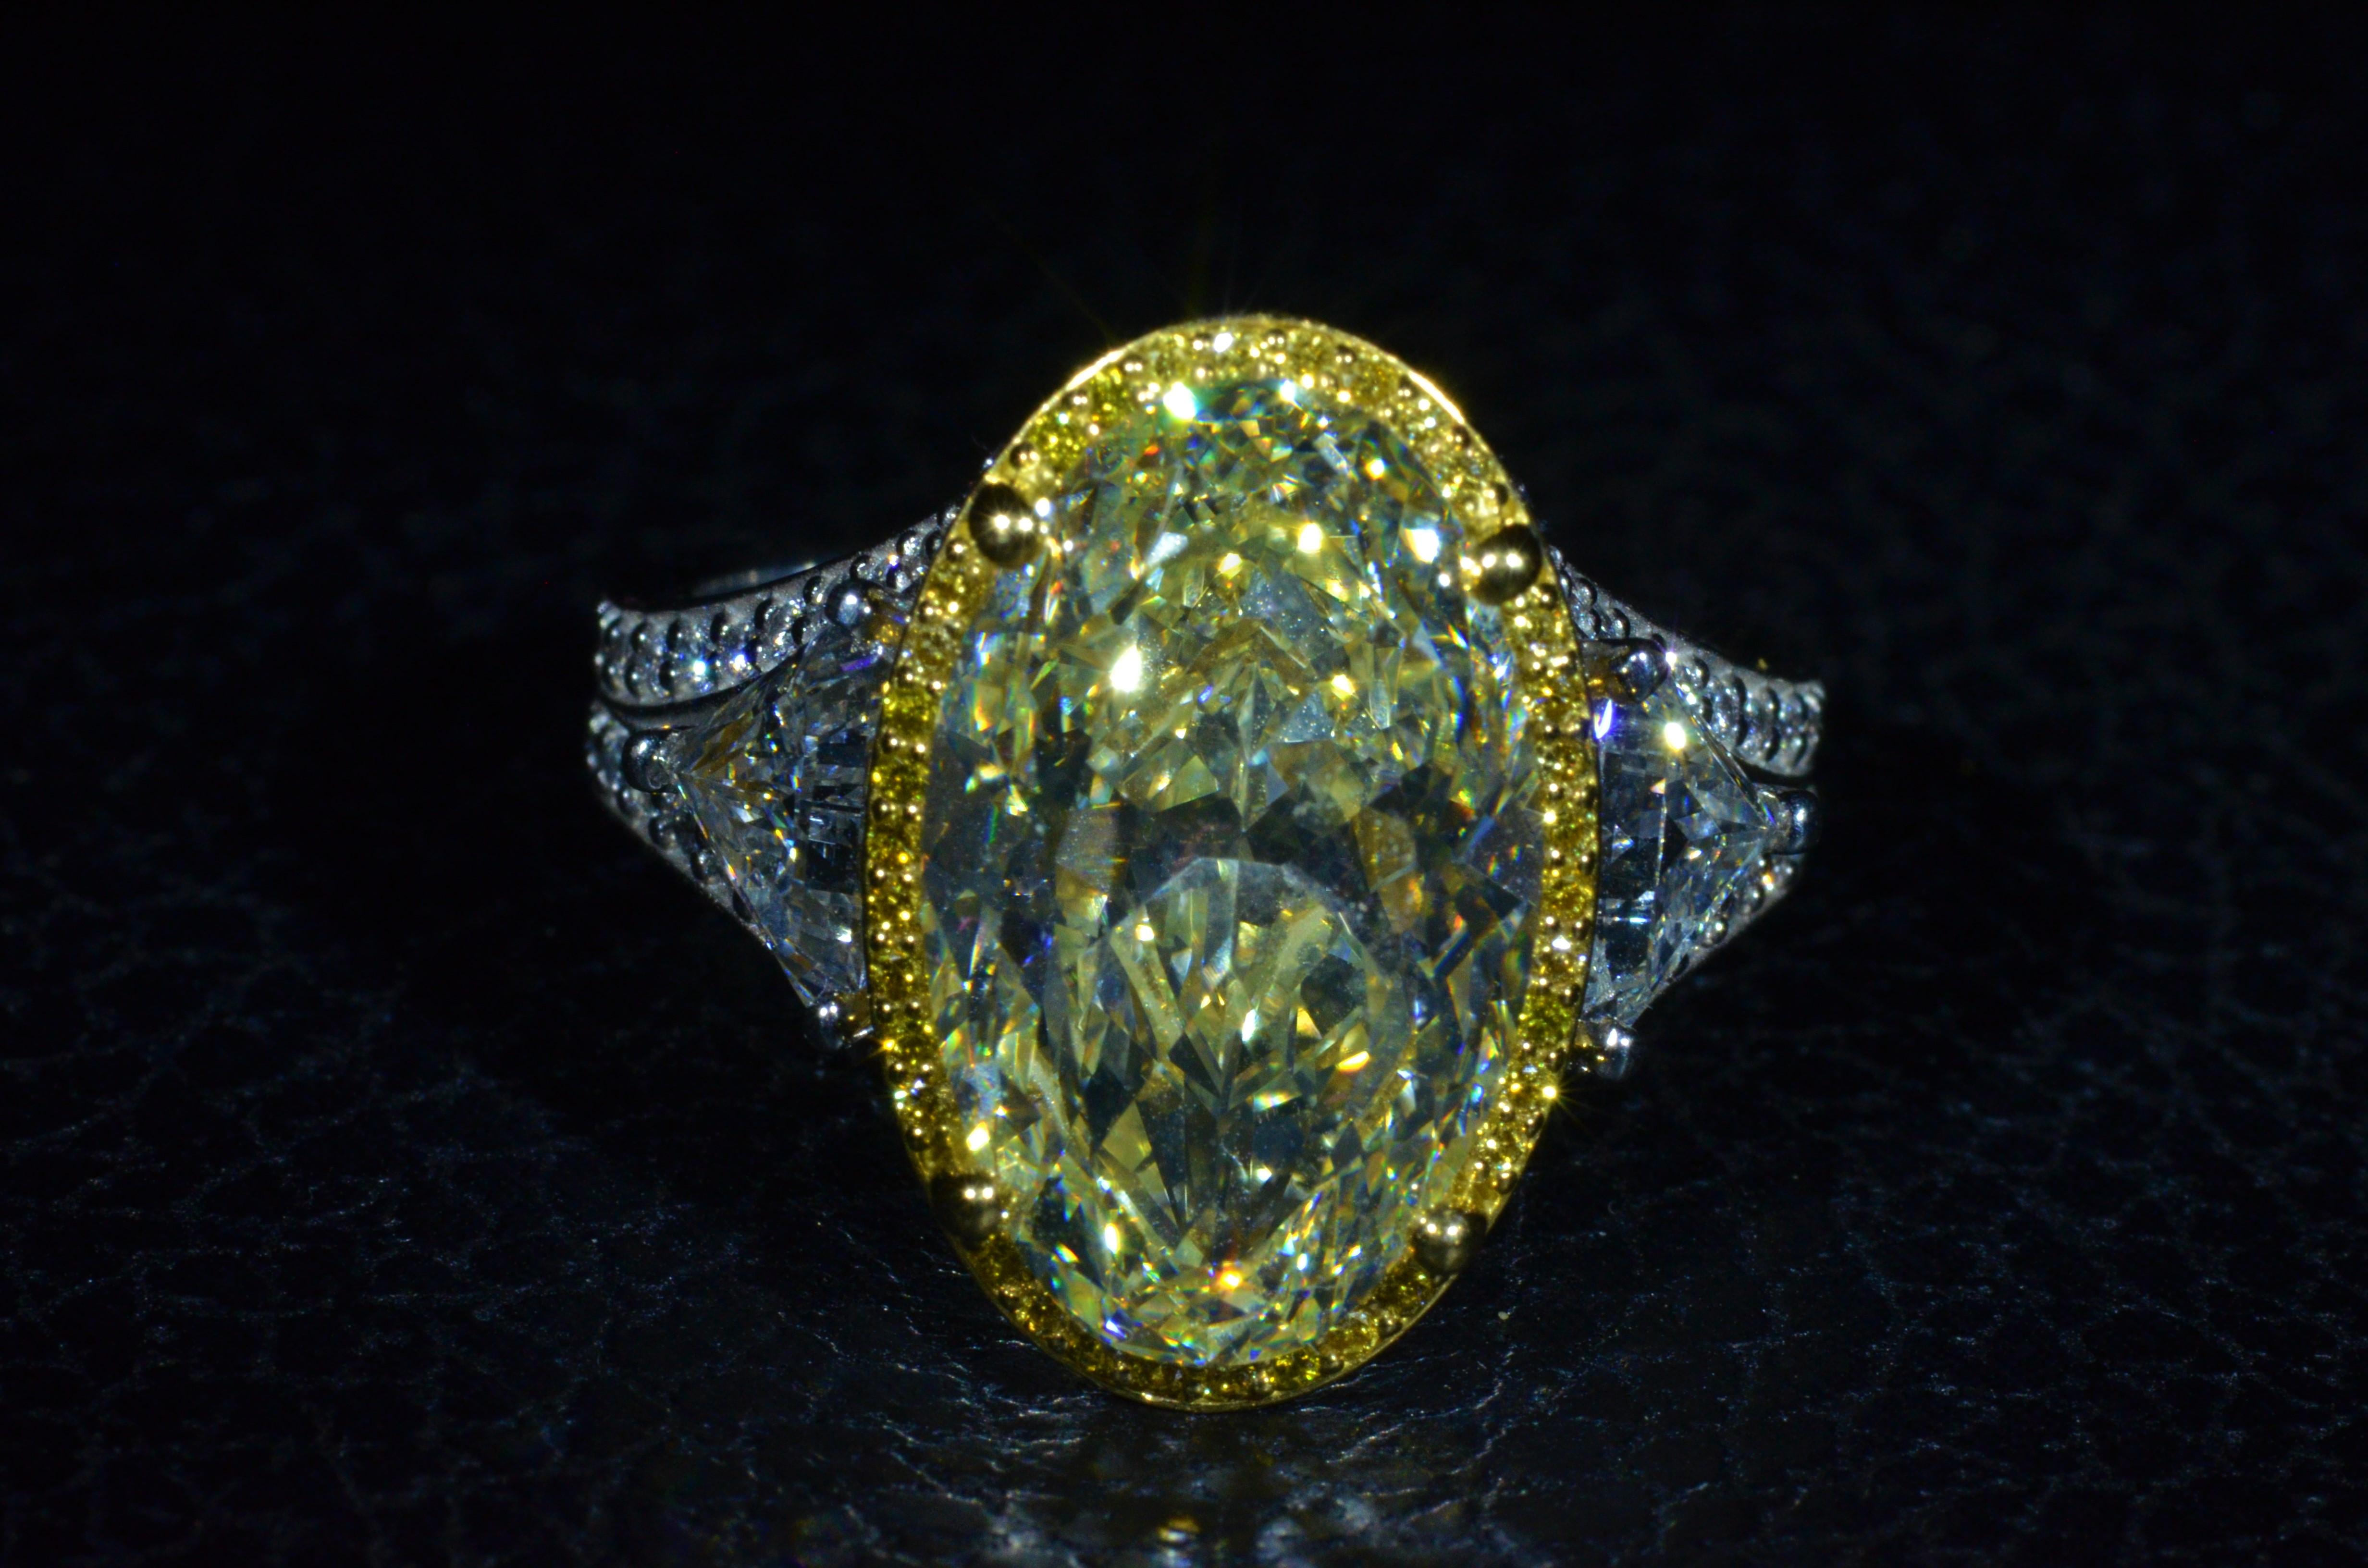 Ladies Platinum and 18 Karat Yellow gold ring set with a 8.48 Carat center oval brilliant cut diamond.  The diamond has a Gemological Institute of America clarity grade of VVS2 and a color grade of Y-Z for the fancy light yellow look.  Surrounding